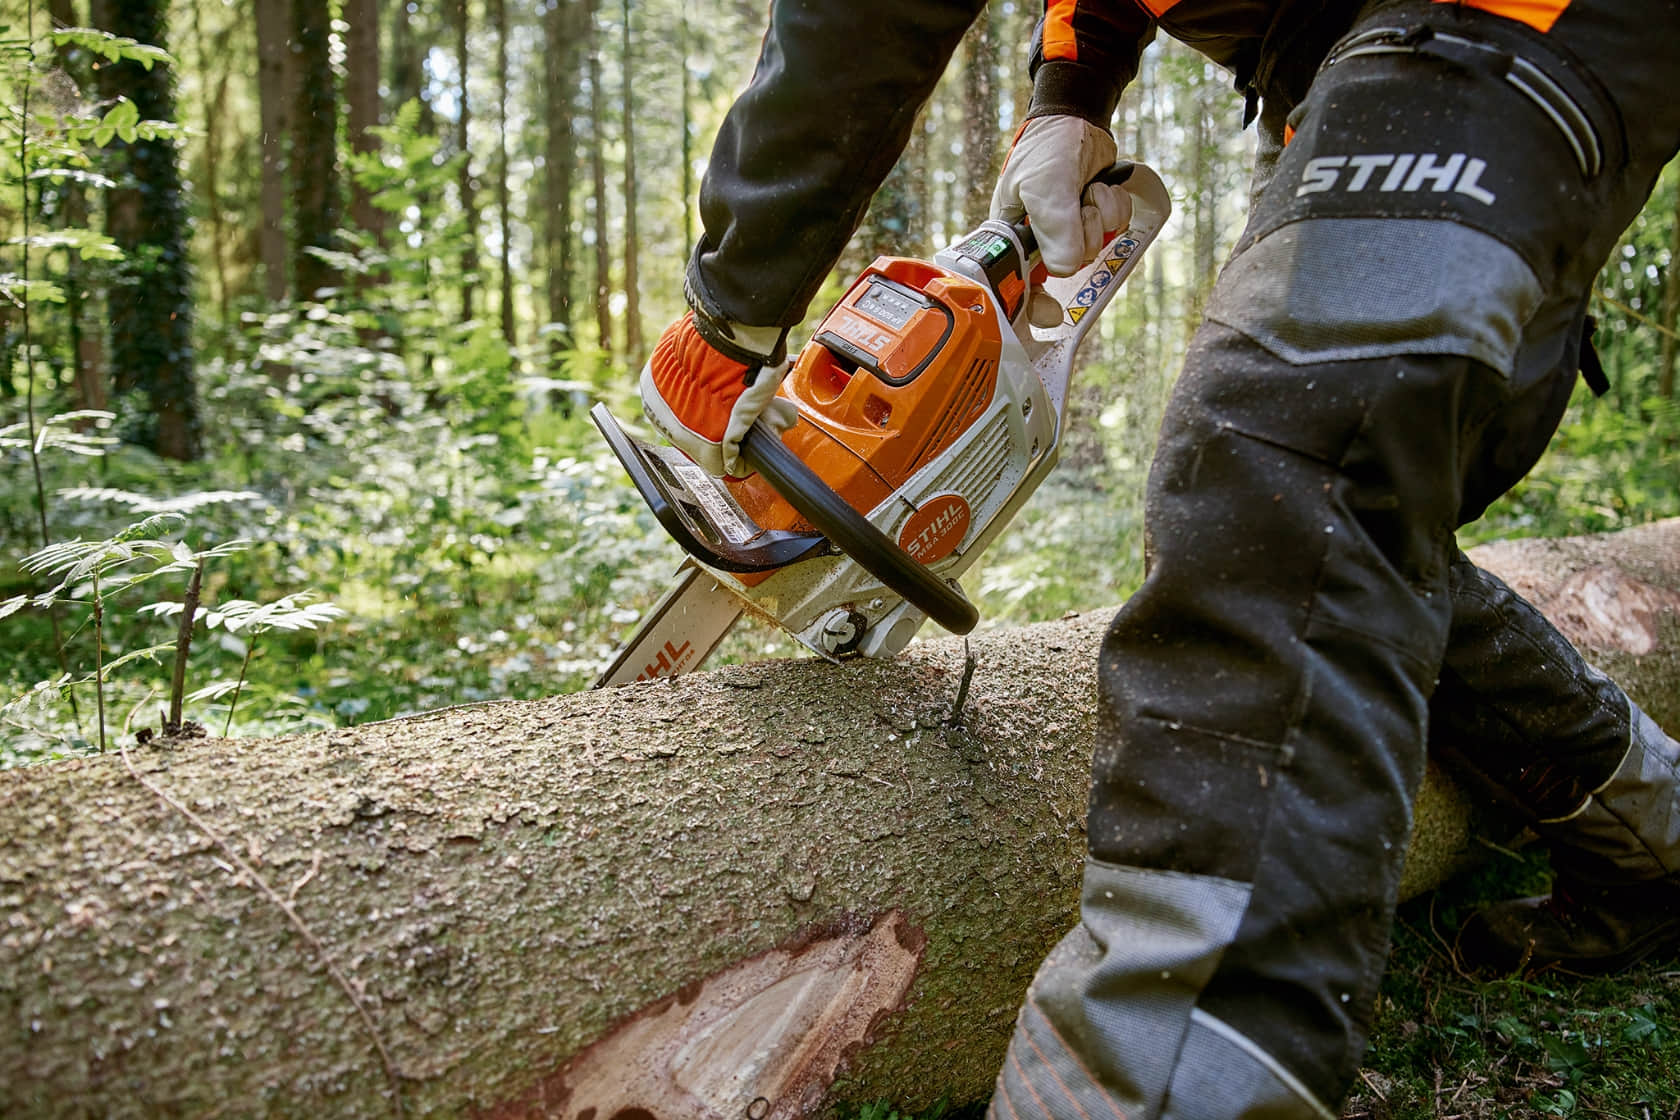 The STIHL MSA 300 takes battery power to the next level. The high-performance battery-powered chainsaw optimally brings together power, performance, comfort, and modern design.